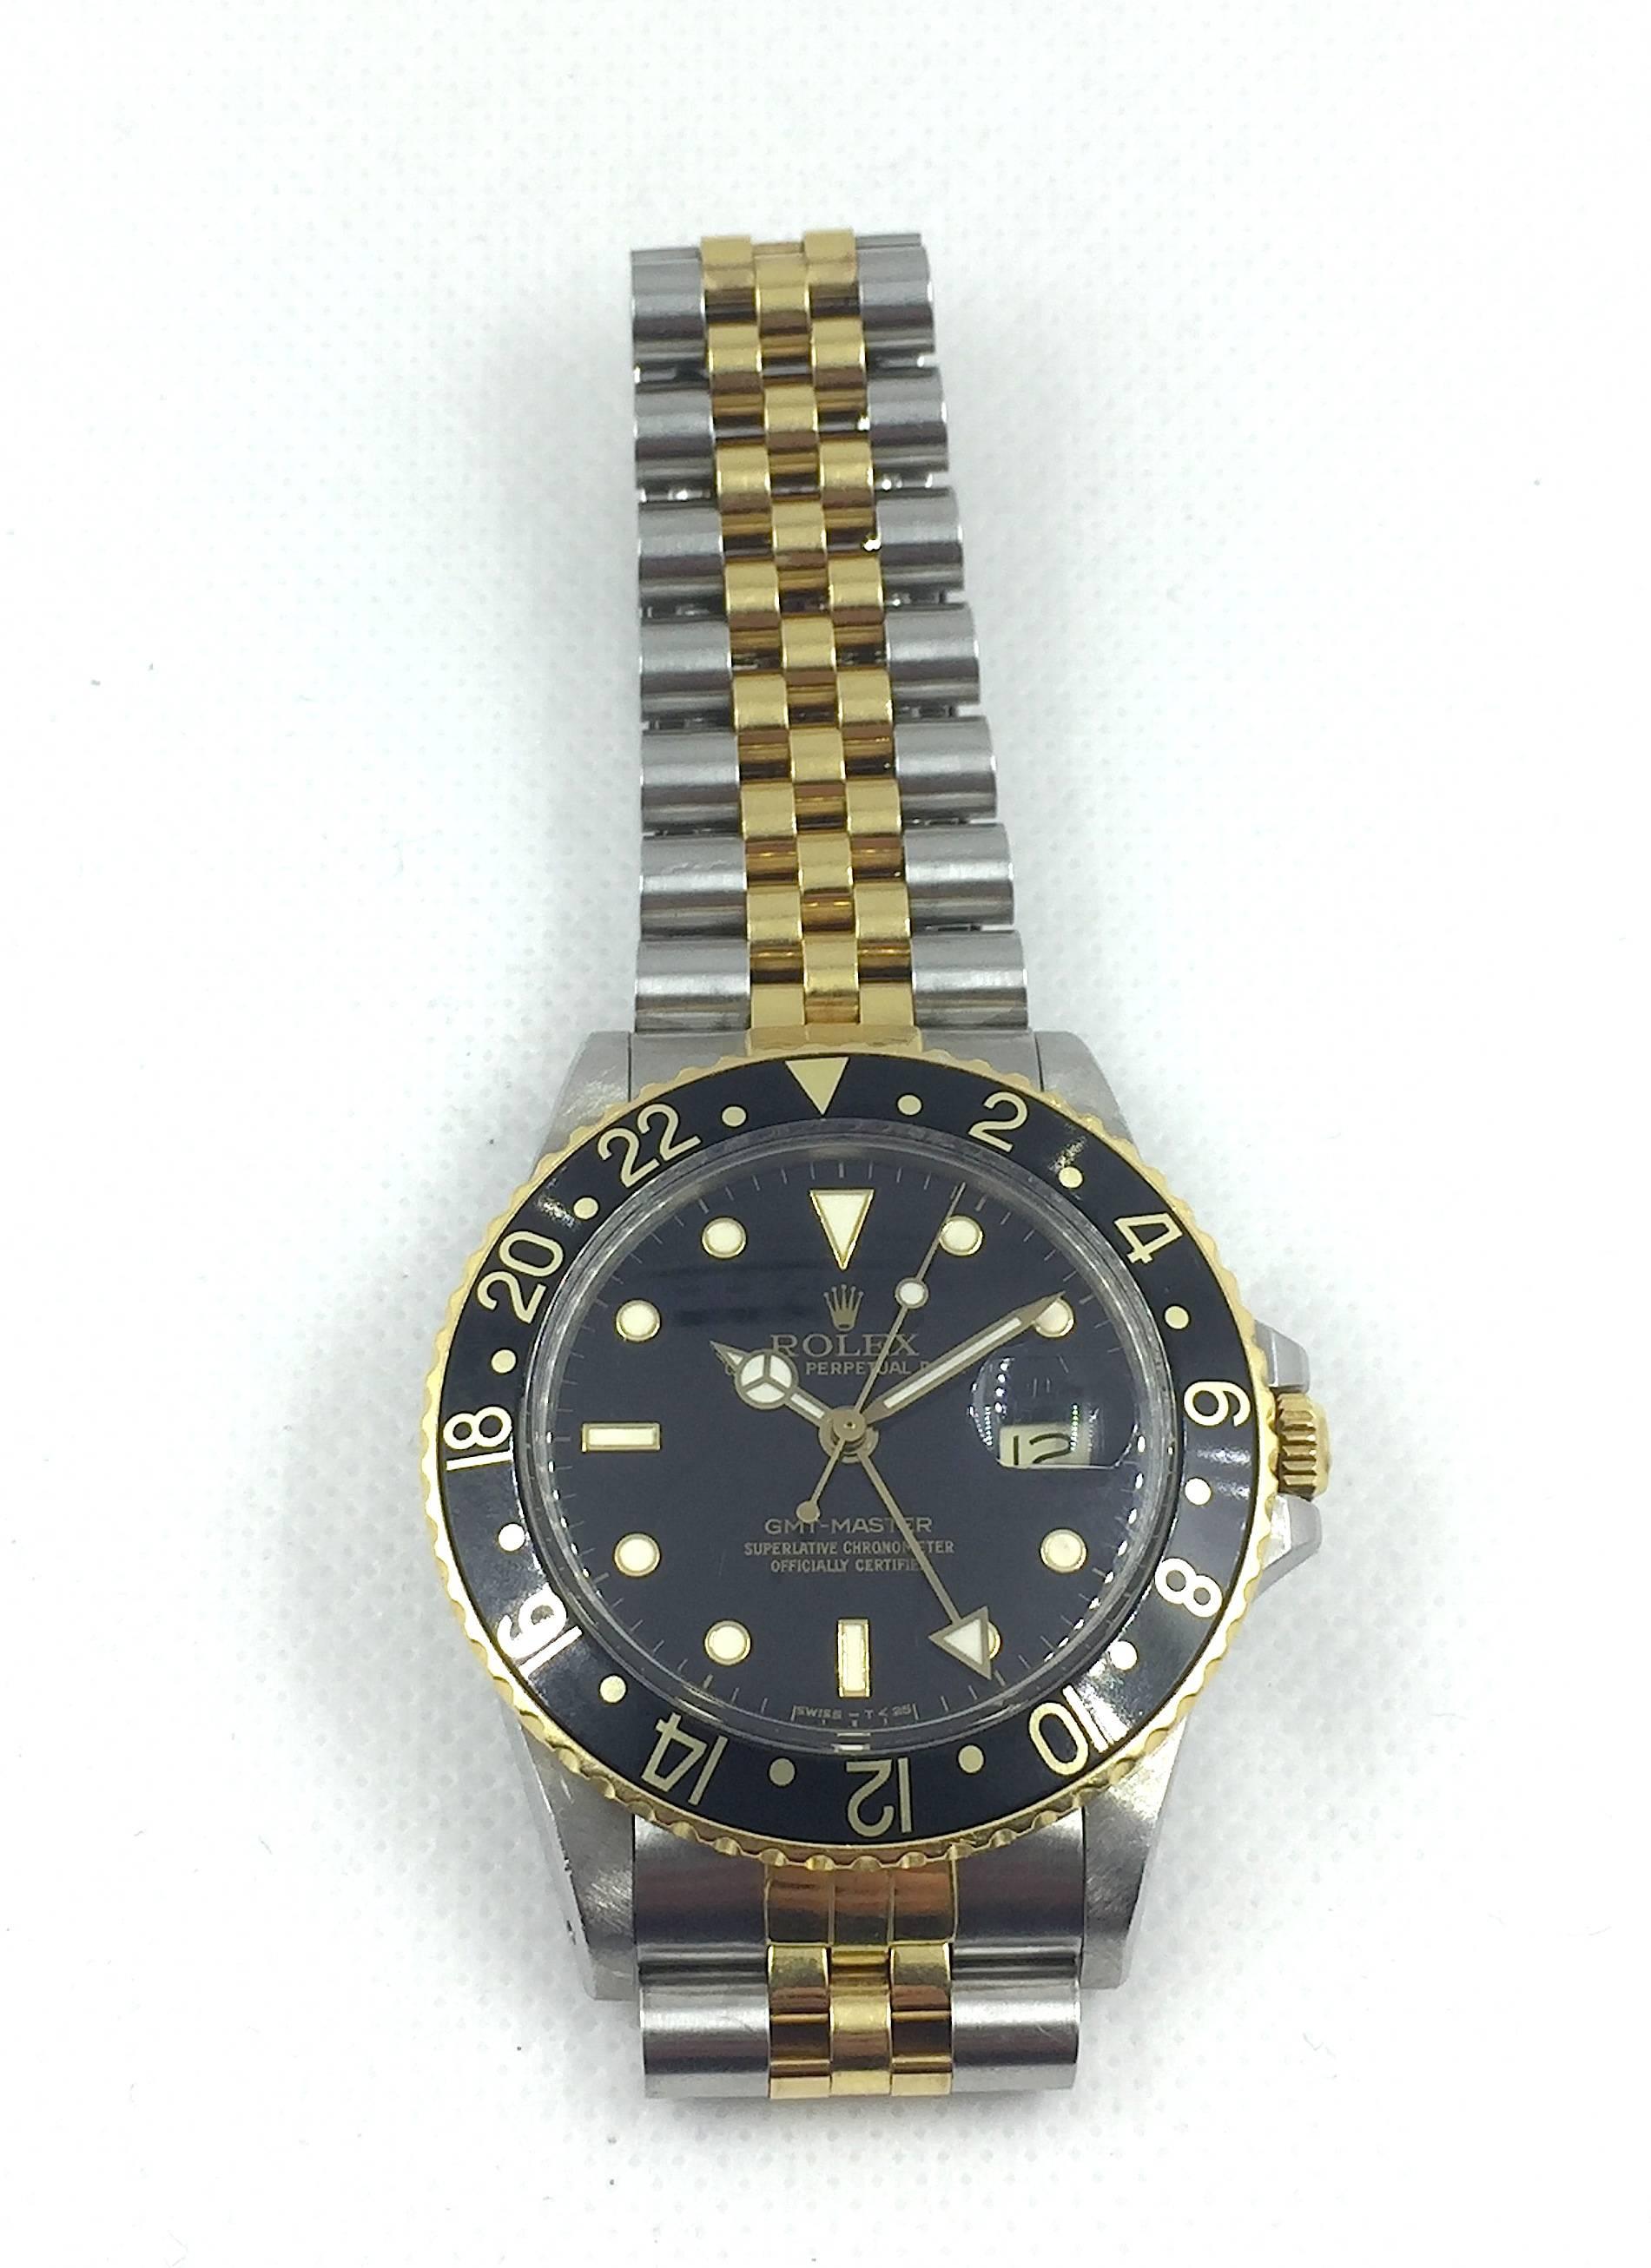 Rolex Stainless Steel and 18K Yellow Gold Oyster Perpetual GMT Master Wristwatch
Factory Black Gloss Dial with Luminous Markers 
Matching Black and Gold Bezel
40mm in Size
Rolex Calibre Base 3000 Automatic Quickset Movement
Acrylic Crystal
LAte